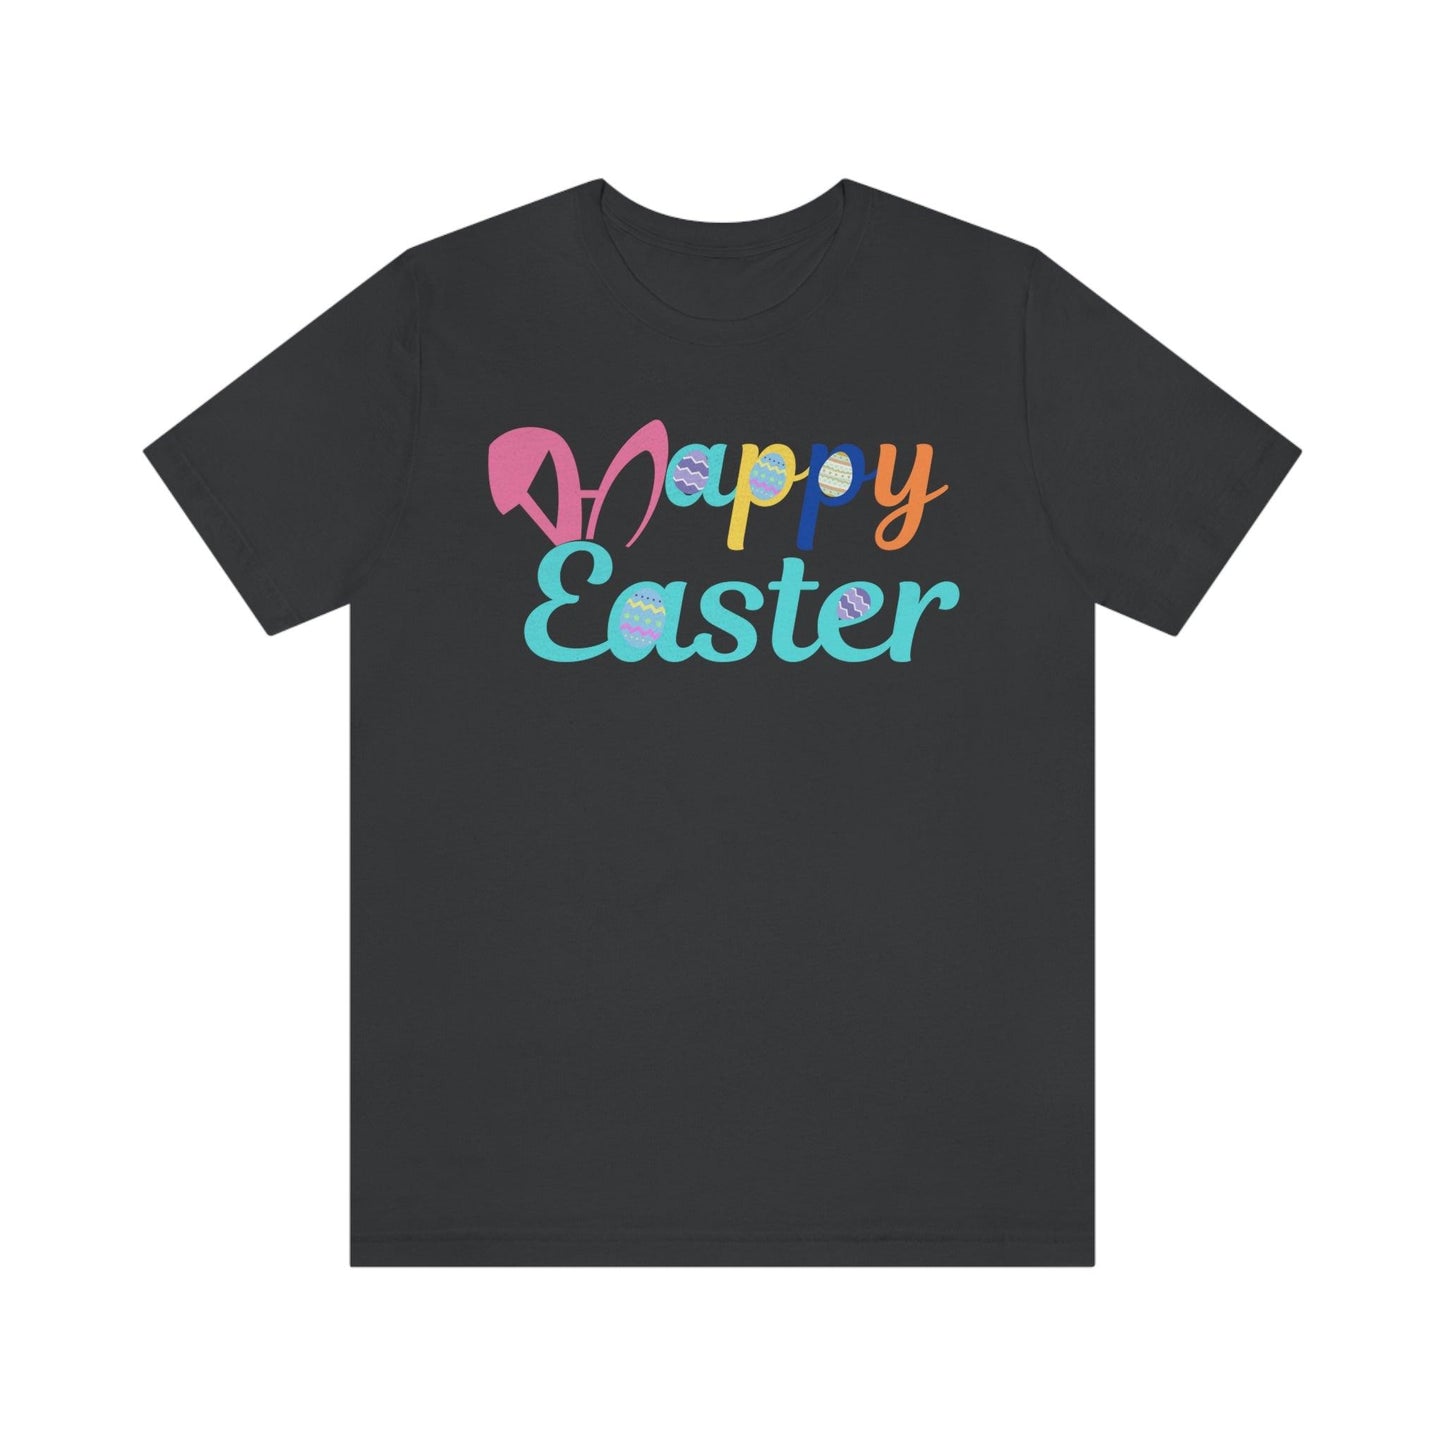 Happy Easter T-shirt, Easter gift for adults, easter shirts